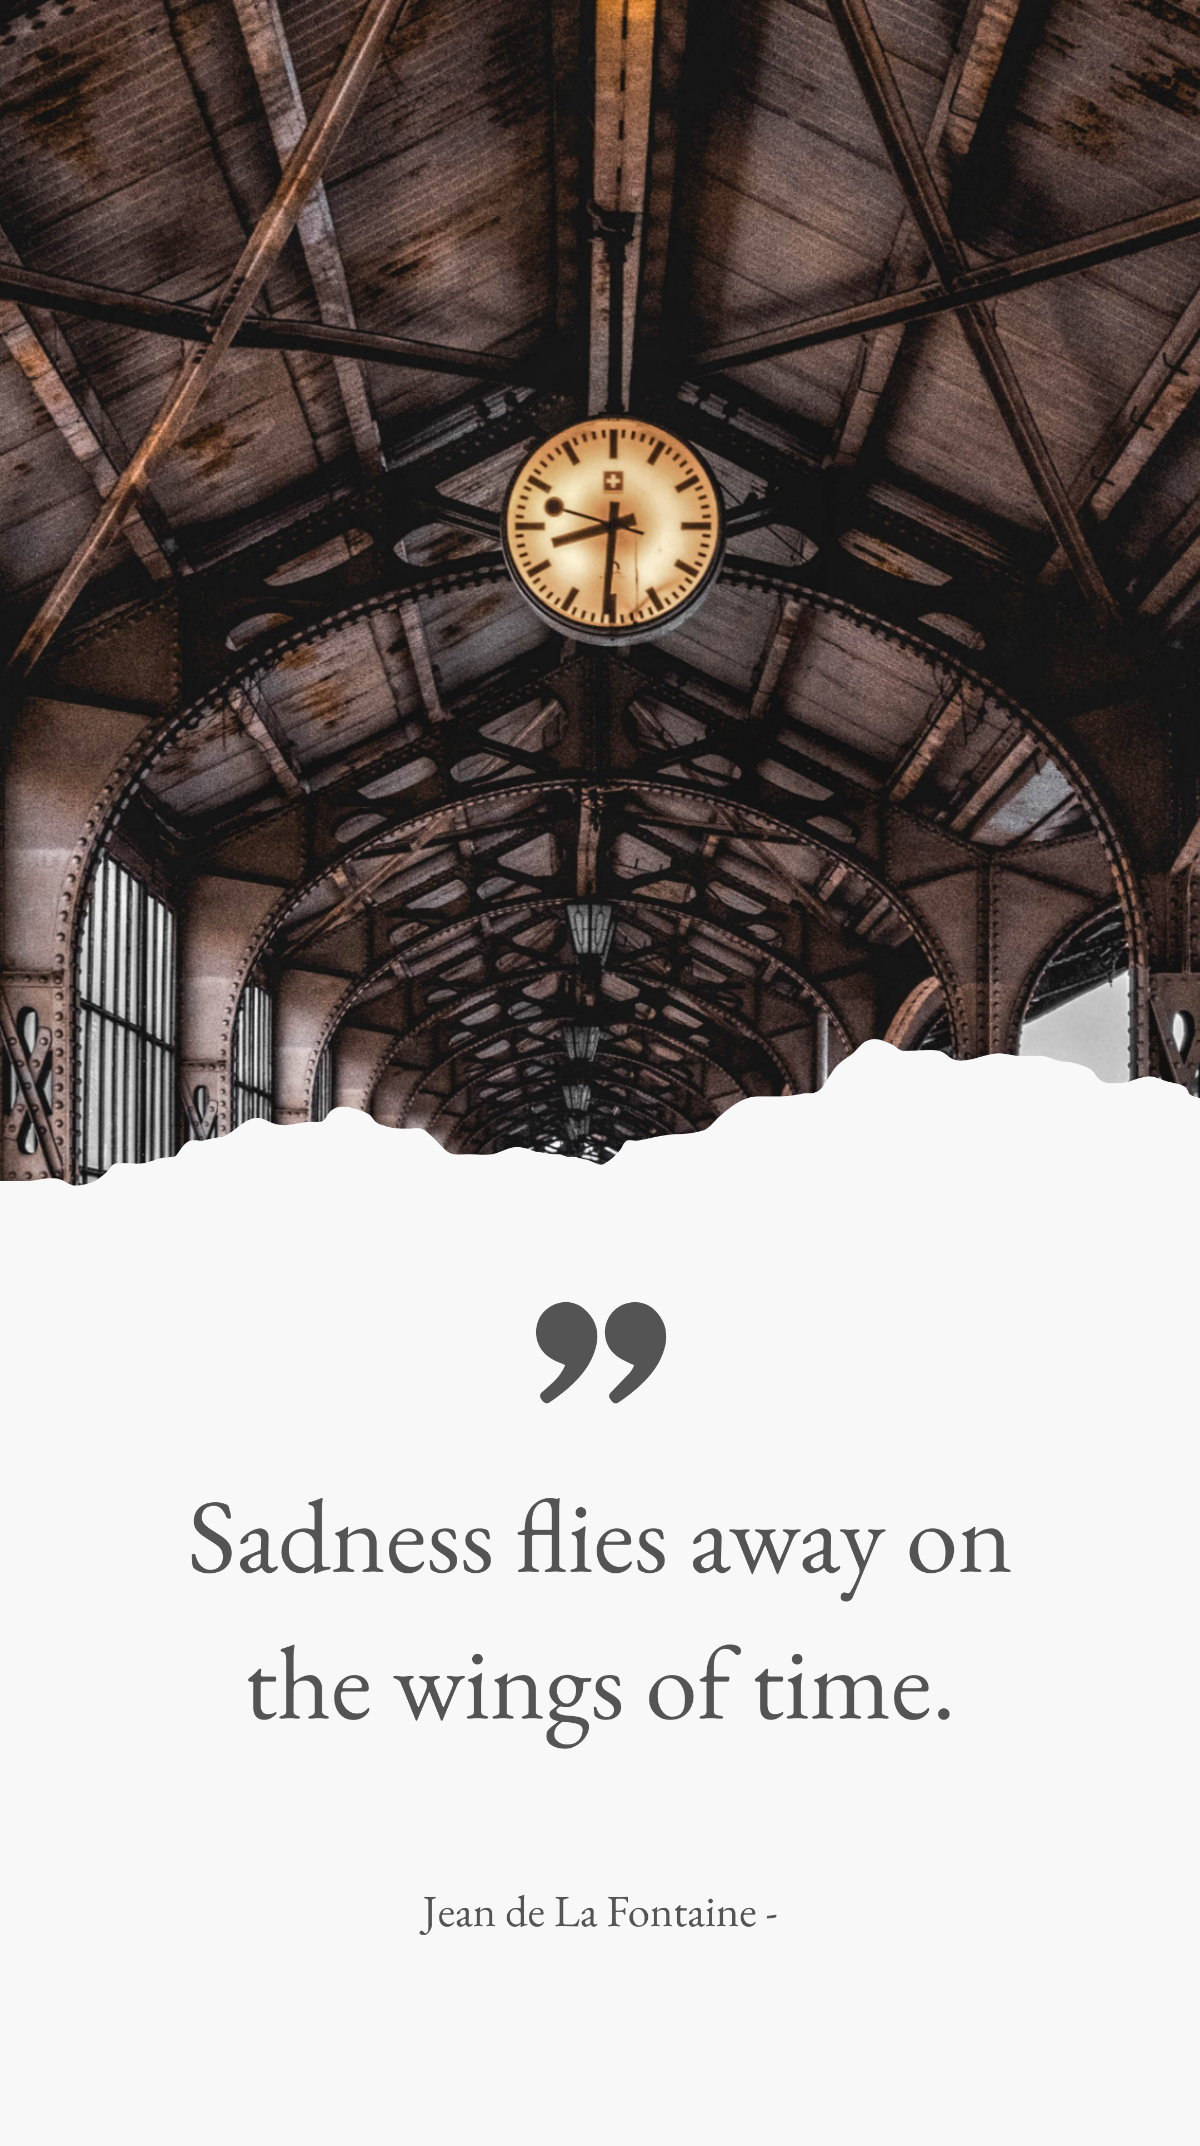 Jean de La Fontaine - Sadness flies away on the wings of time. Template